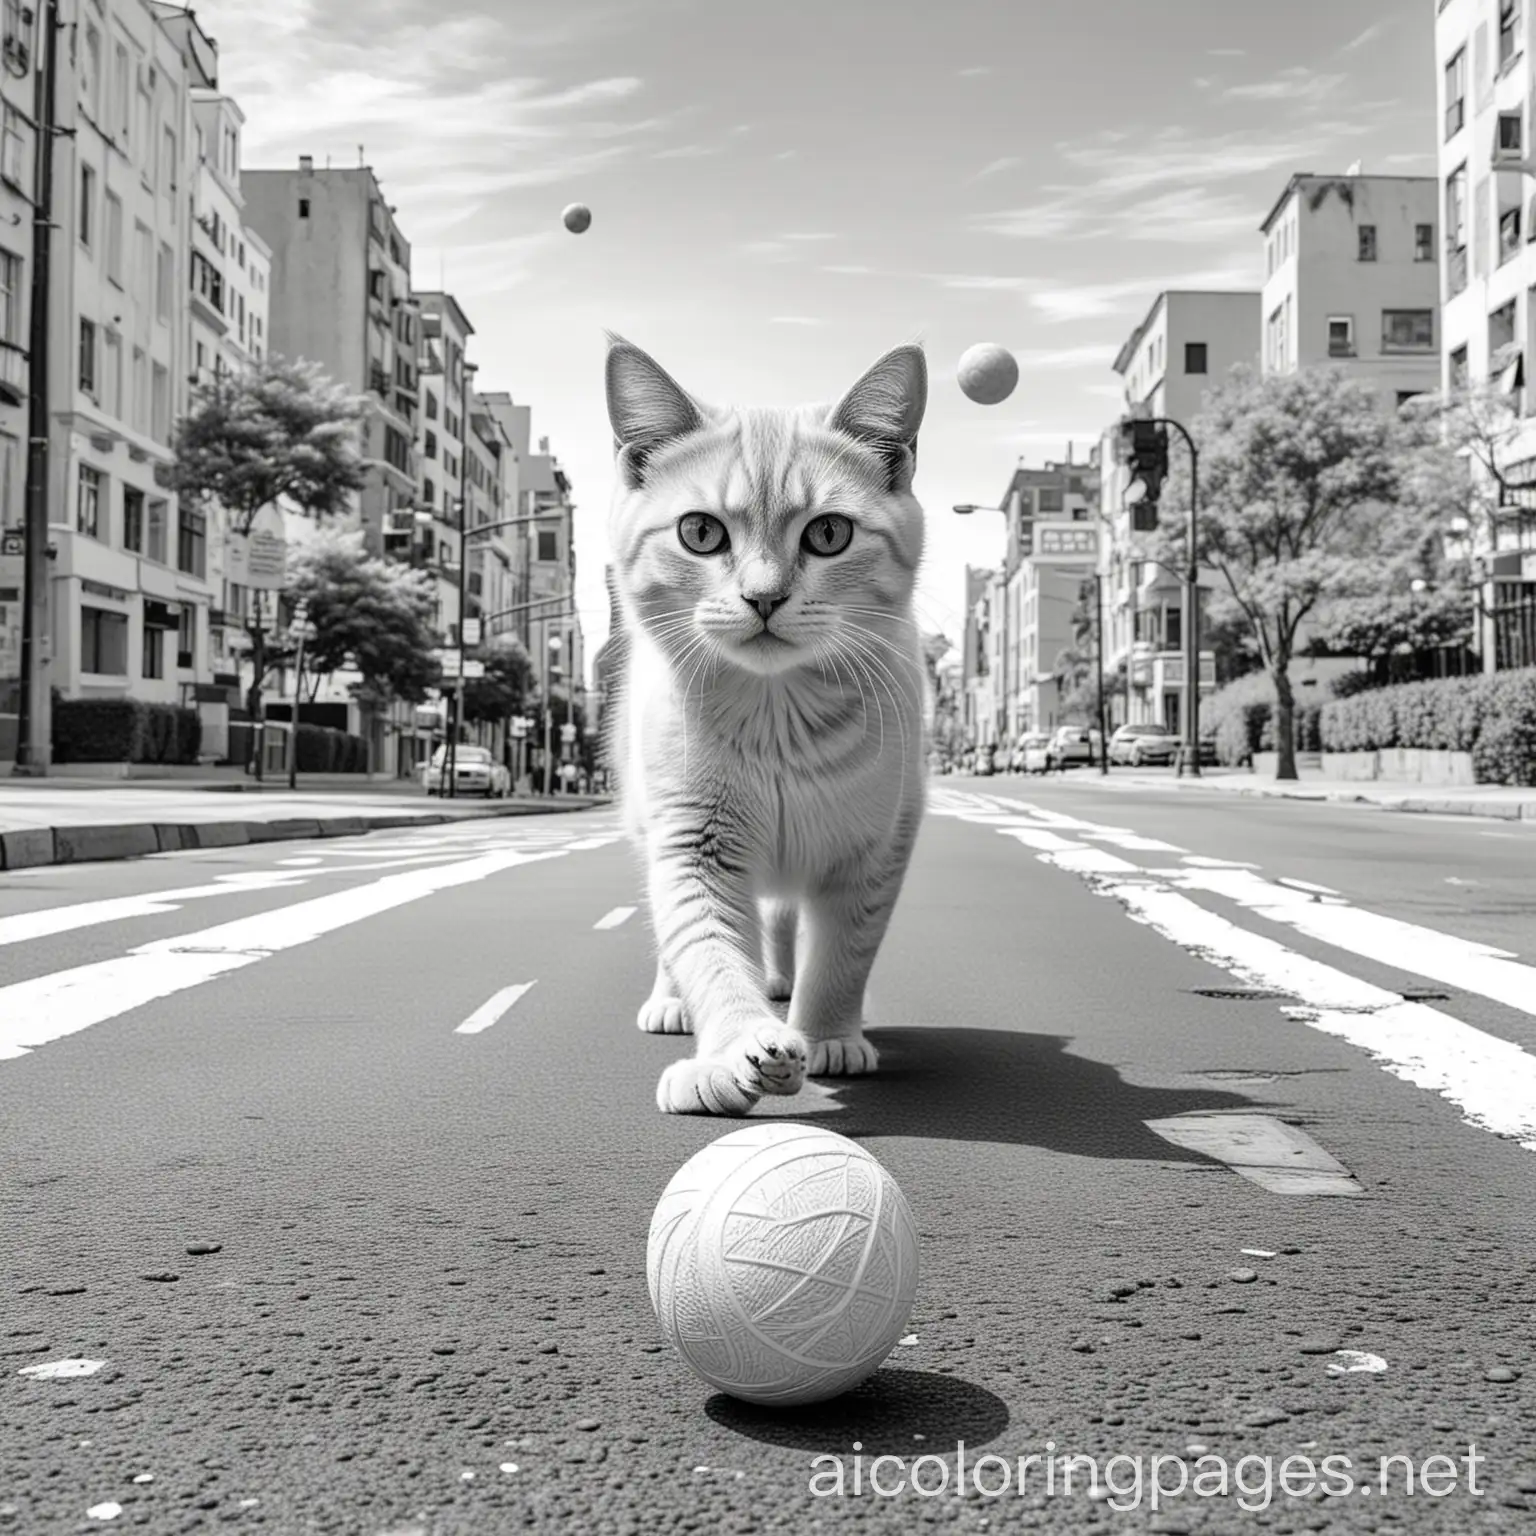 a cat playing with a ball on a road, city background, Coloring Page, black and white, line art, white background, Simplicity, Ample White Space. The background of the coloring page is plain white to make it easy for young children to color within the lines. The outlines of all the subjects are easy to distinguish, making it simple for kids to color without too much difficulty